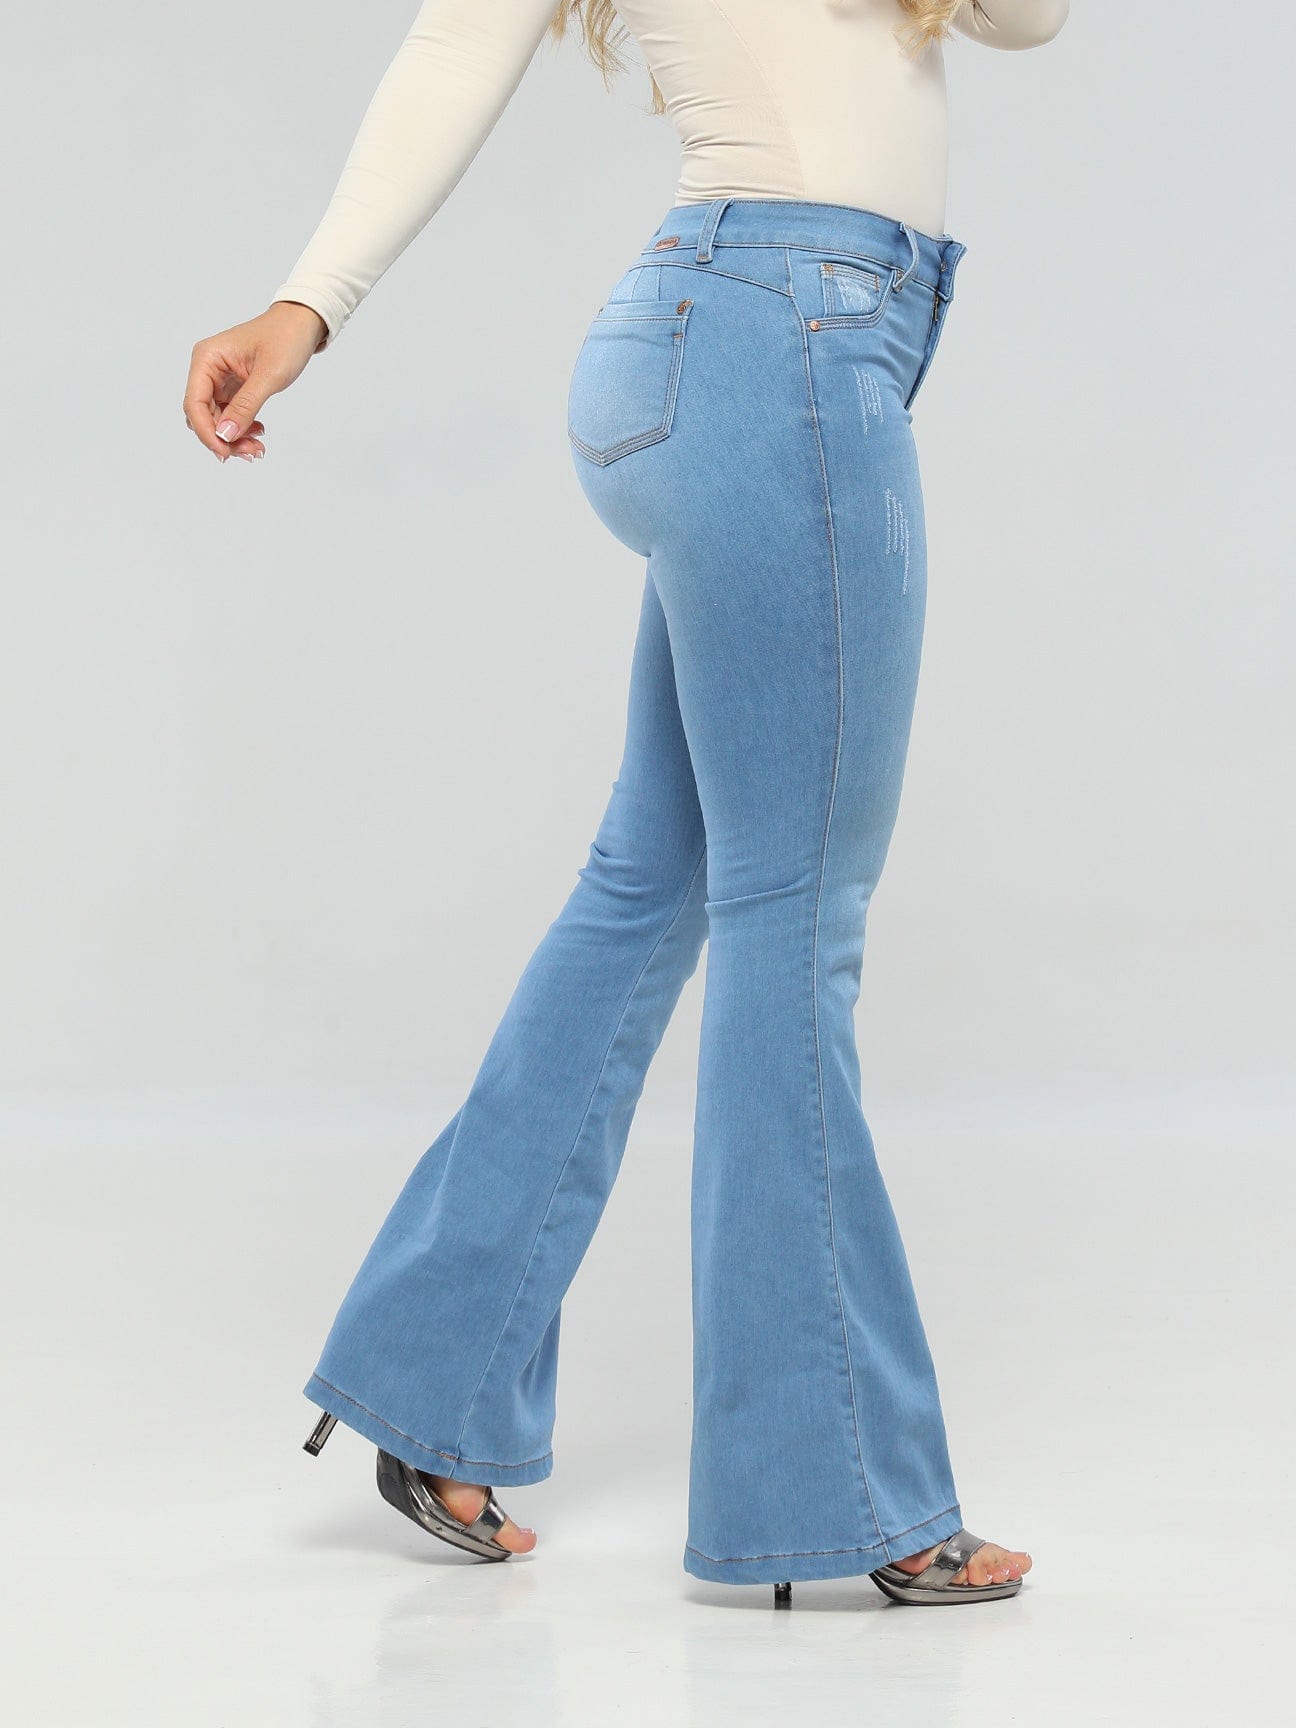 Colombia Jeans Mid-Waist Butt-Lifting Jeans